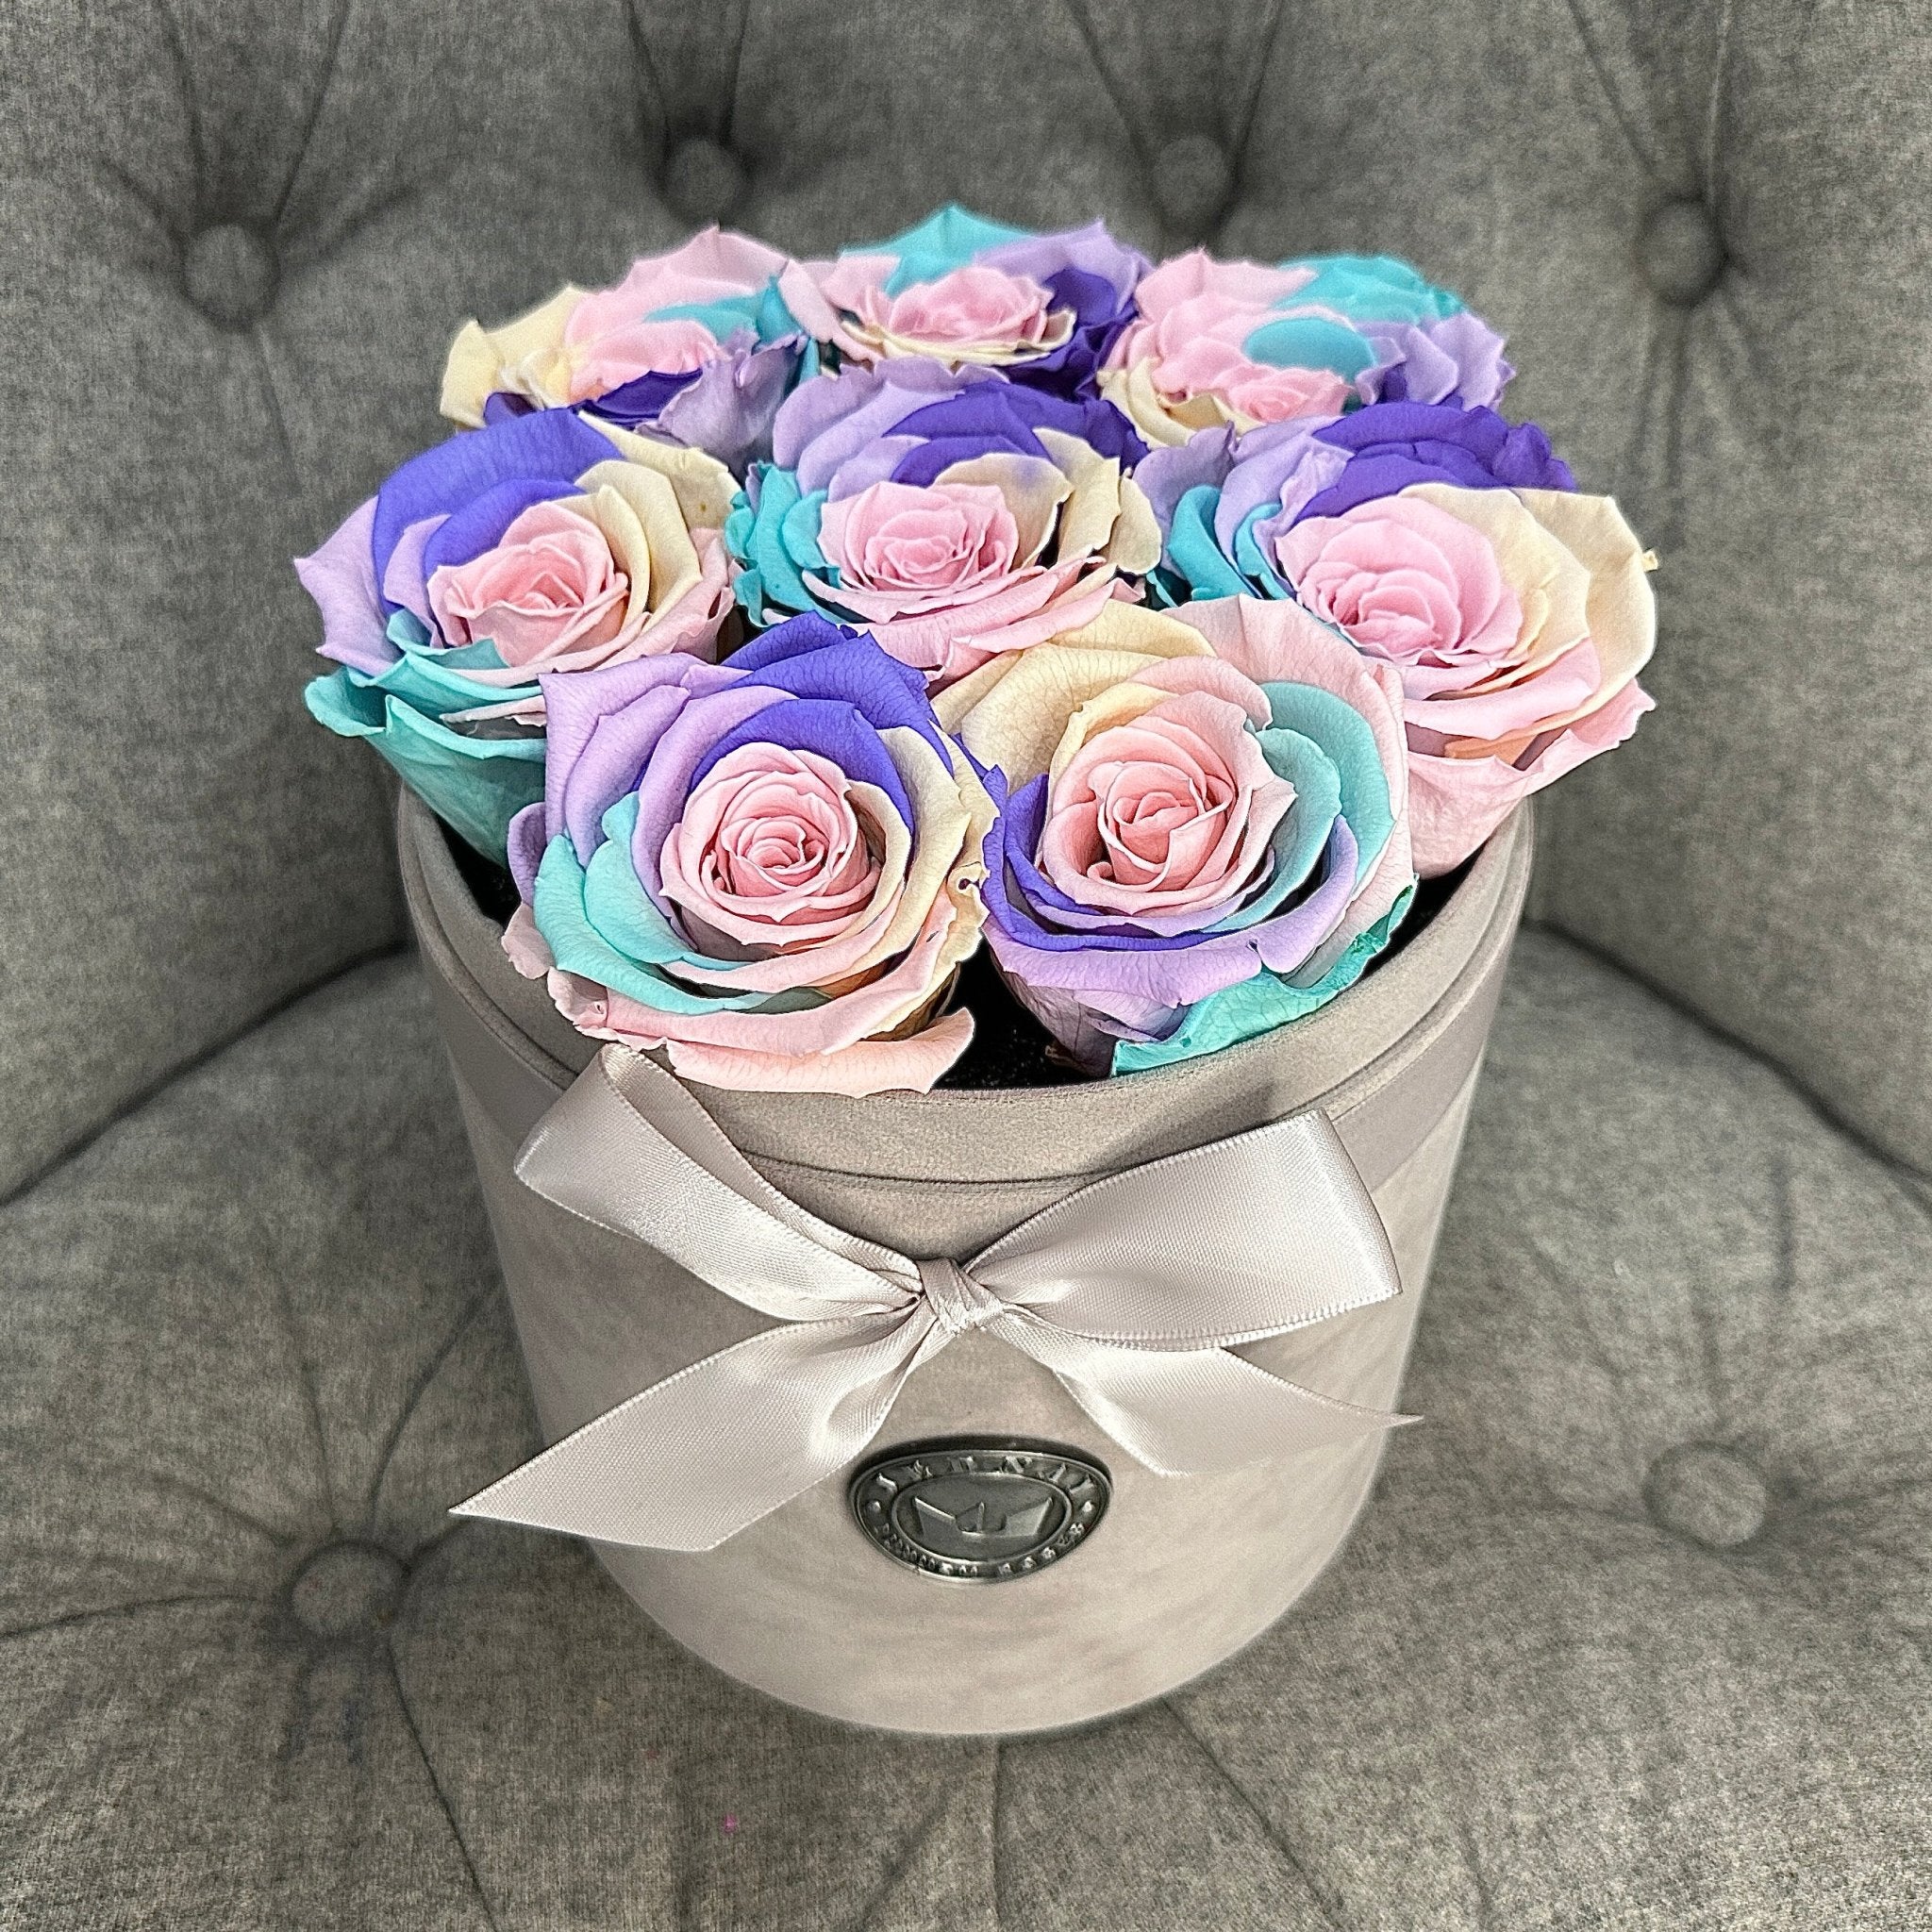 Medium Grey Suede Forever Rose Box - Over The Rainbow Eternal Roses - Jednay Roses